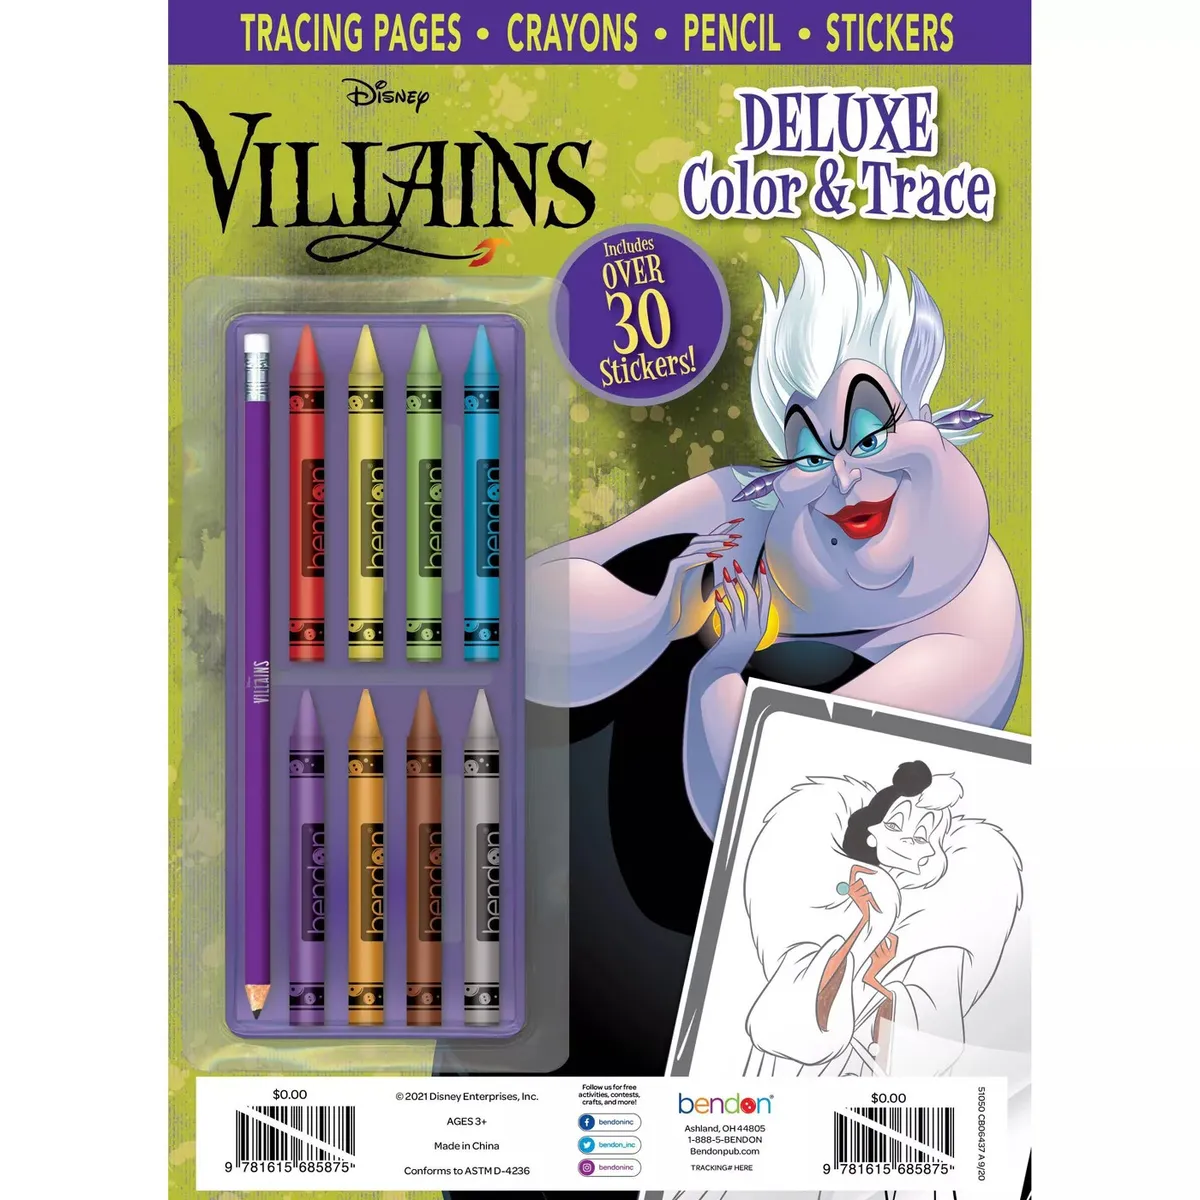 Disney villains deluxe color and trace coloring book w pencil crayons new e